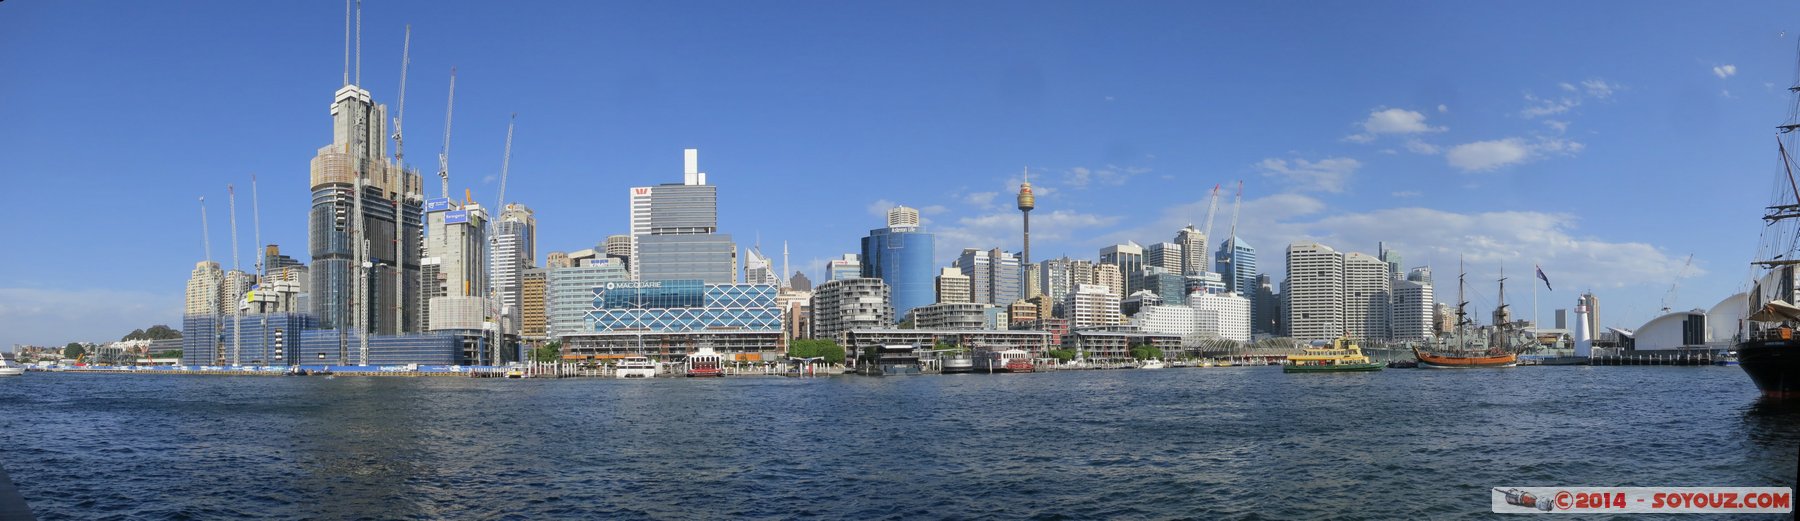 Sydney - Darling Harbour - Panorama
Stitched Panorama
Mots-clés: AUS Australie Darling Harbour geo:lat=-33.86684300 geo:lon=151.19861800 geotagged New South Wales Sydney Sydney Tower panorama